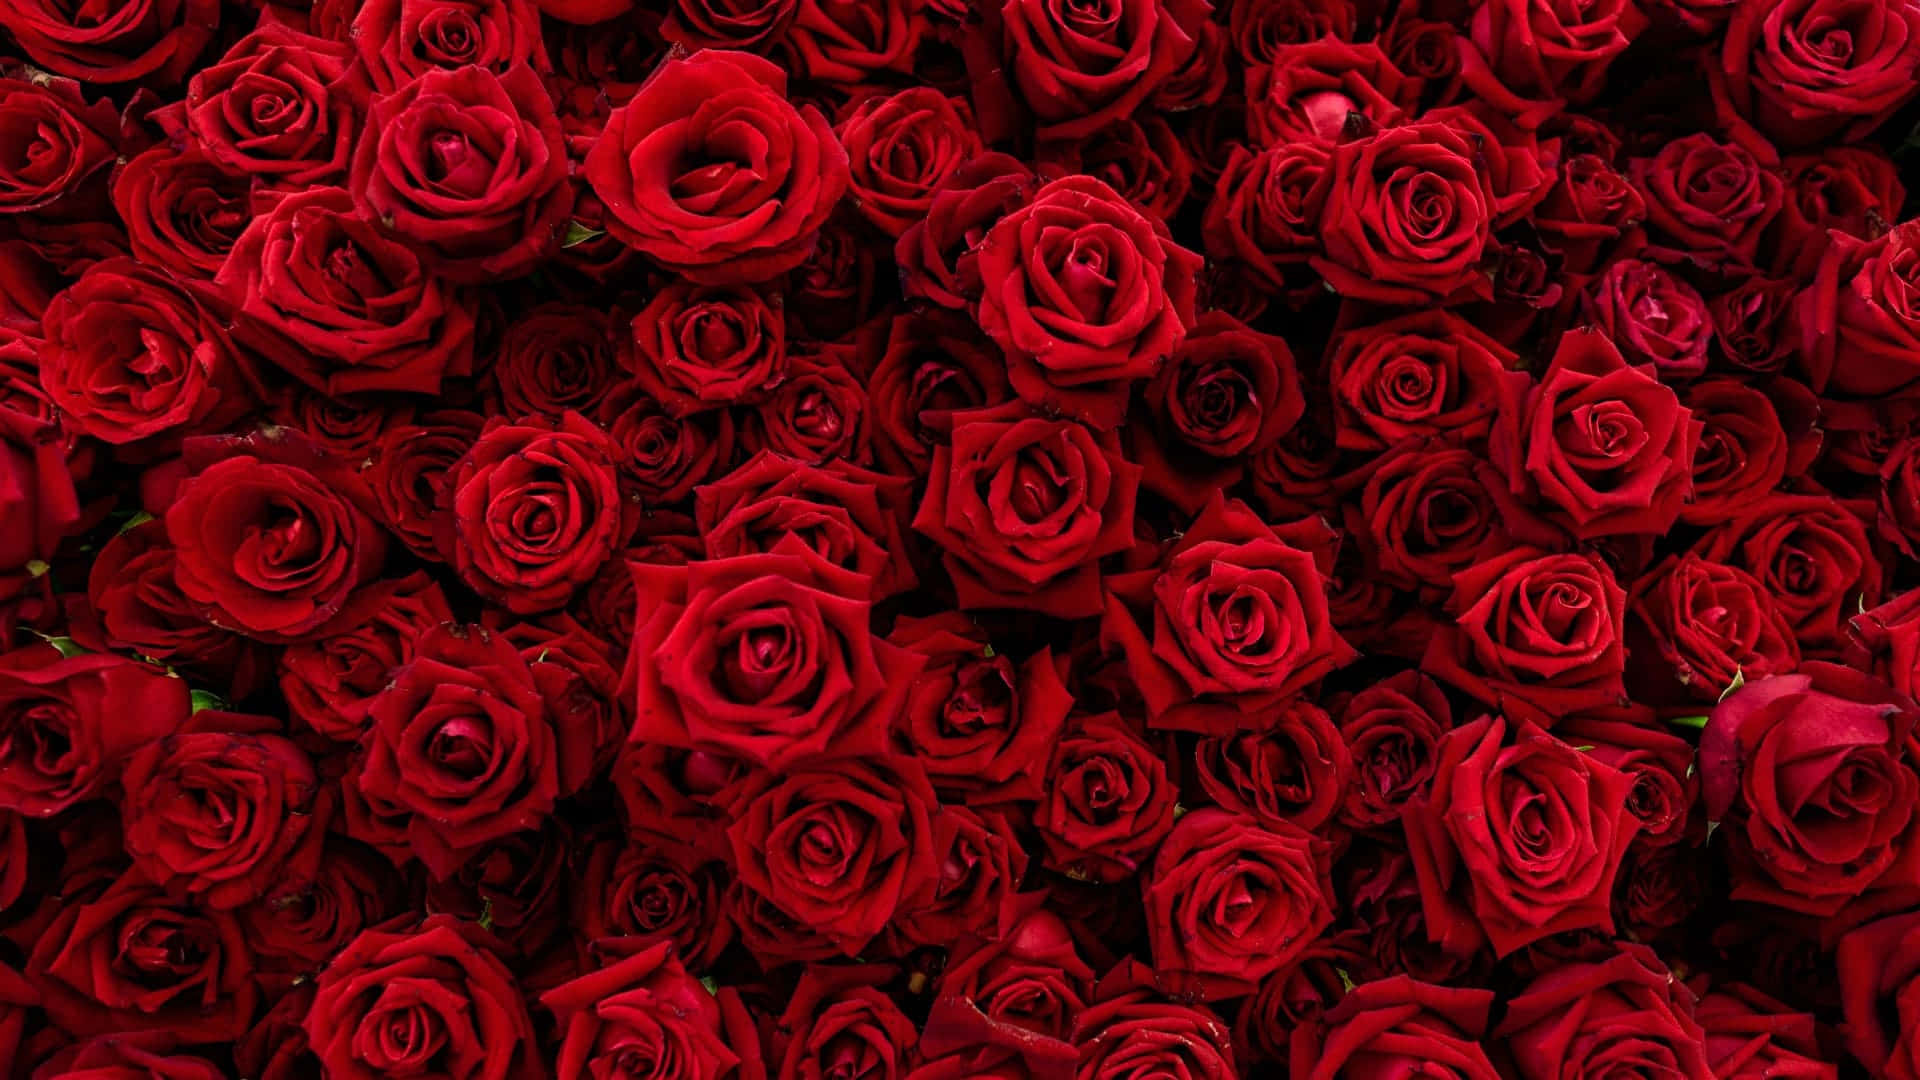 A Rose Colored Laptop Wallpaper